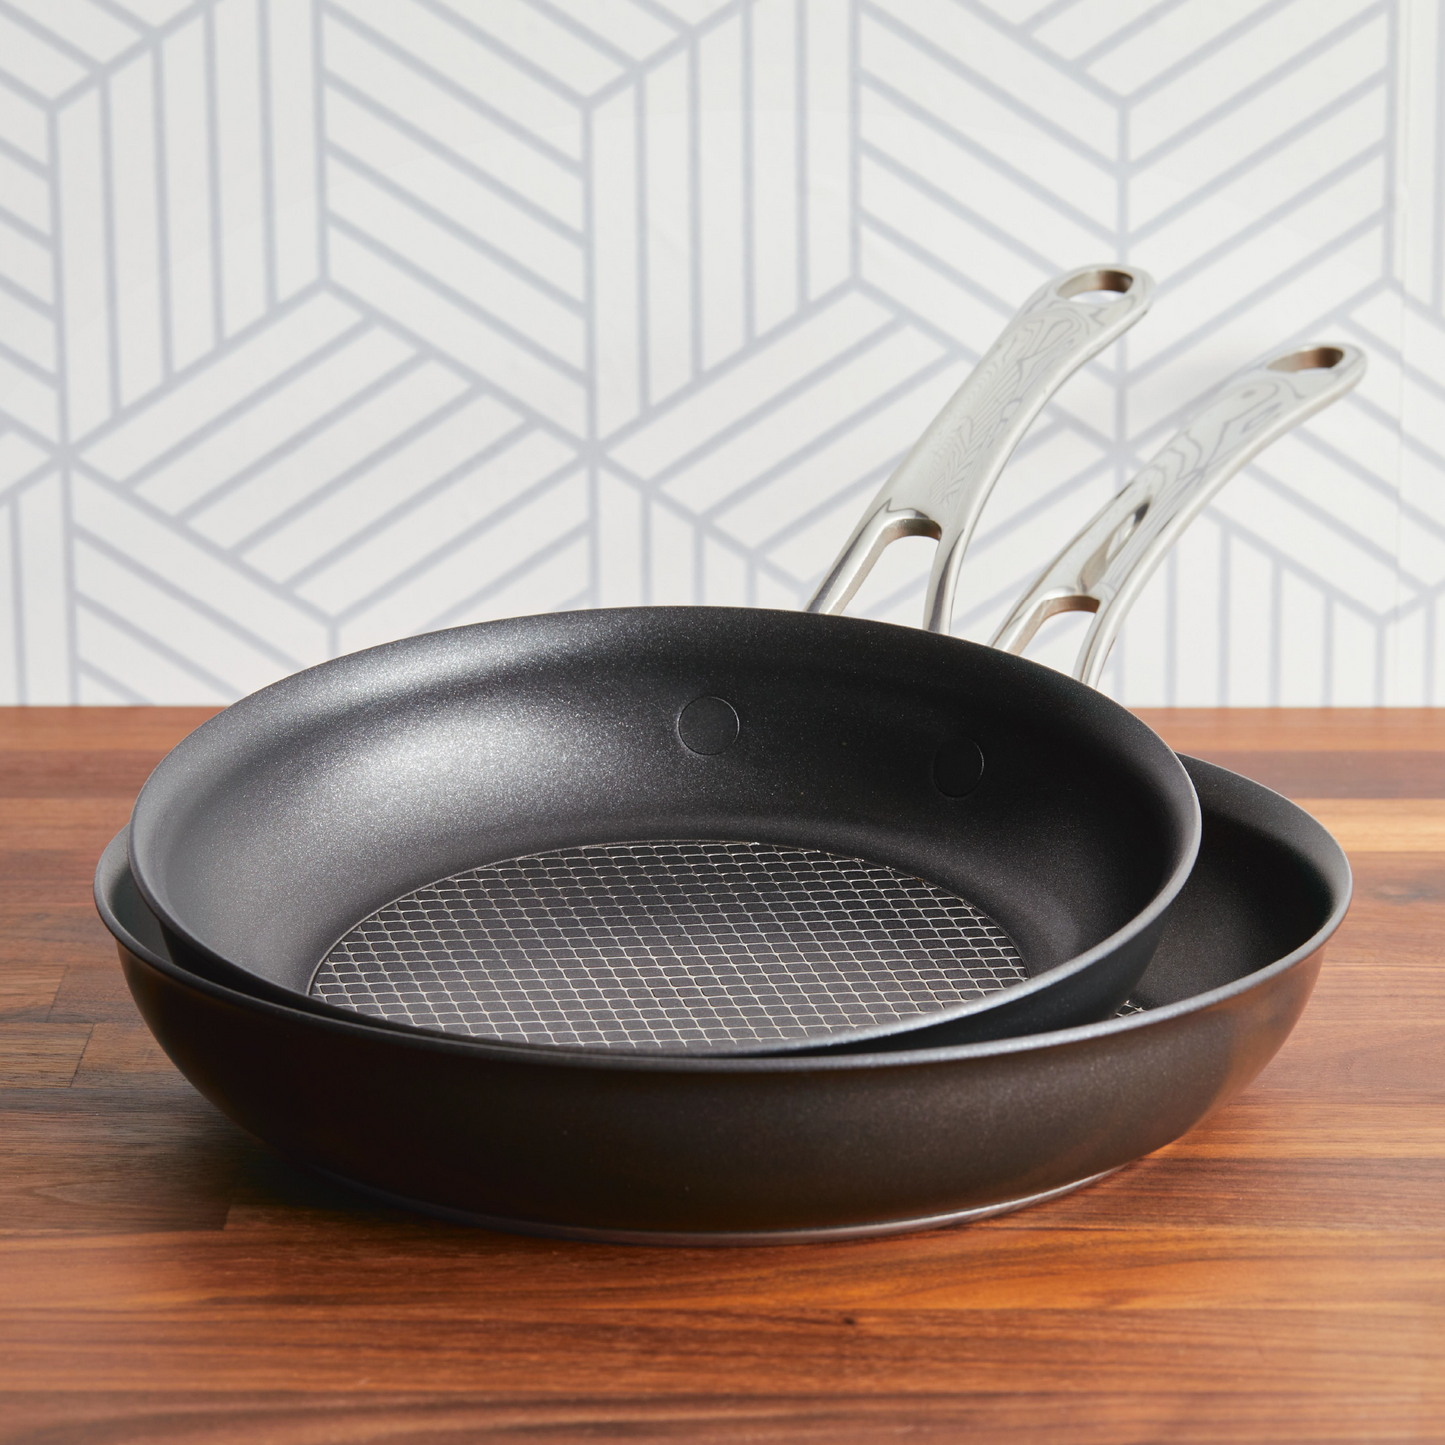 Anolon X Hybrid Nonstick Induction Skillet Twin Pack 21/25cm